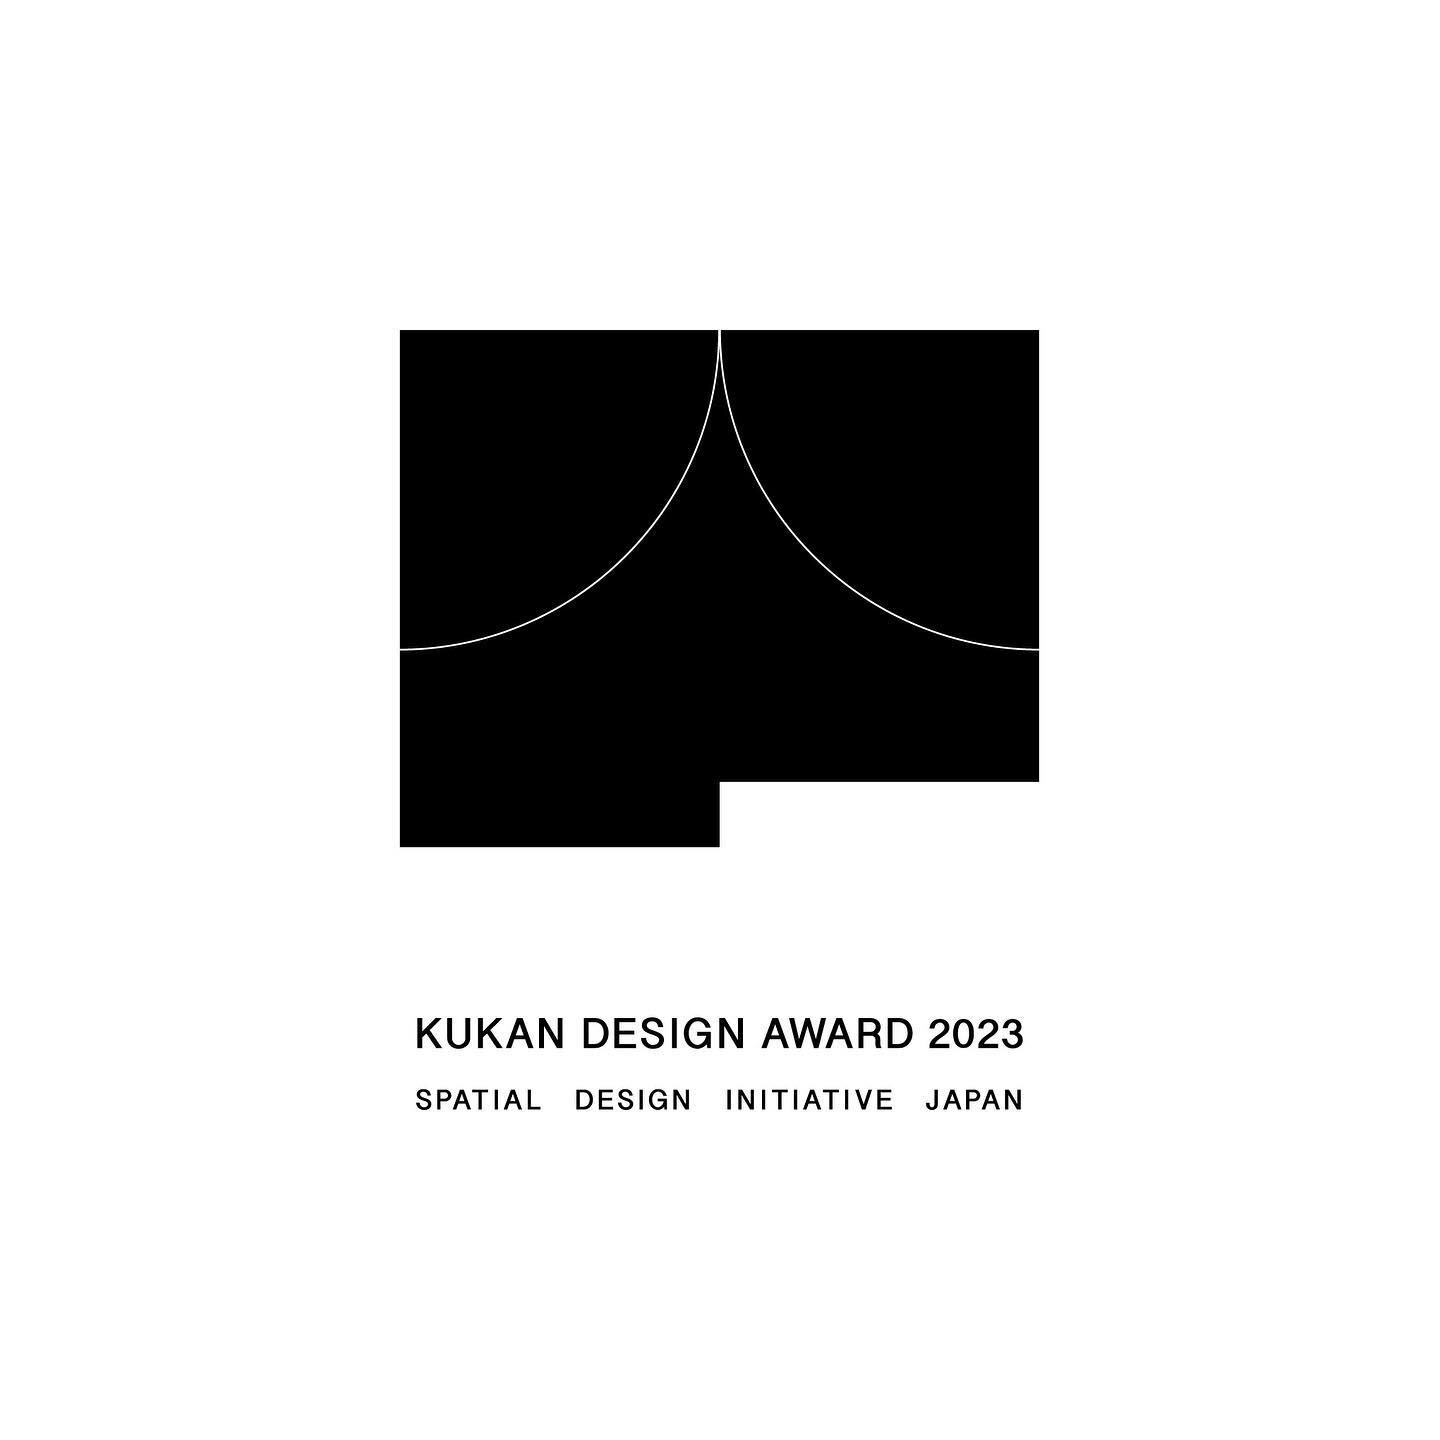 &lsquo;KUKAN DESIGN AWARD 2023&rsquo; will open for entries from 31 March.

JCDとDSAが共同主催する「日本空間デザイン賞」が、2023年3月31日(金)より、2023年度の応募受付を開始します。（受付締切：2023年5月15日）

Kukan Design Award is one of the largest spatial design award in Japan. The purpose of Kuka